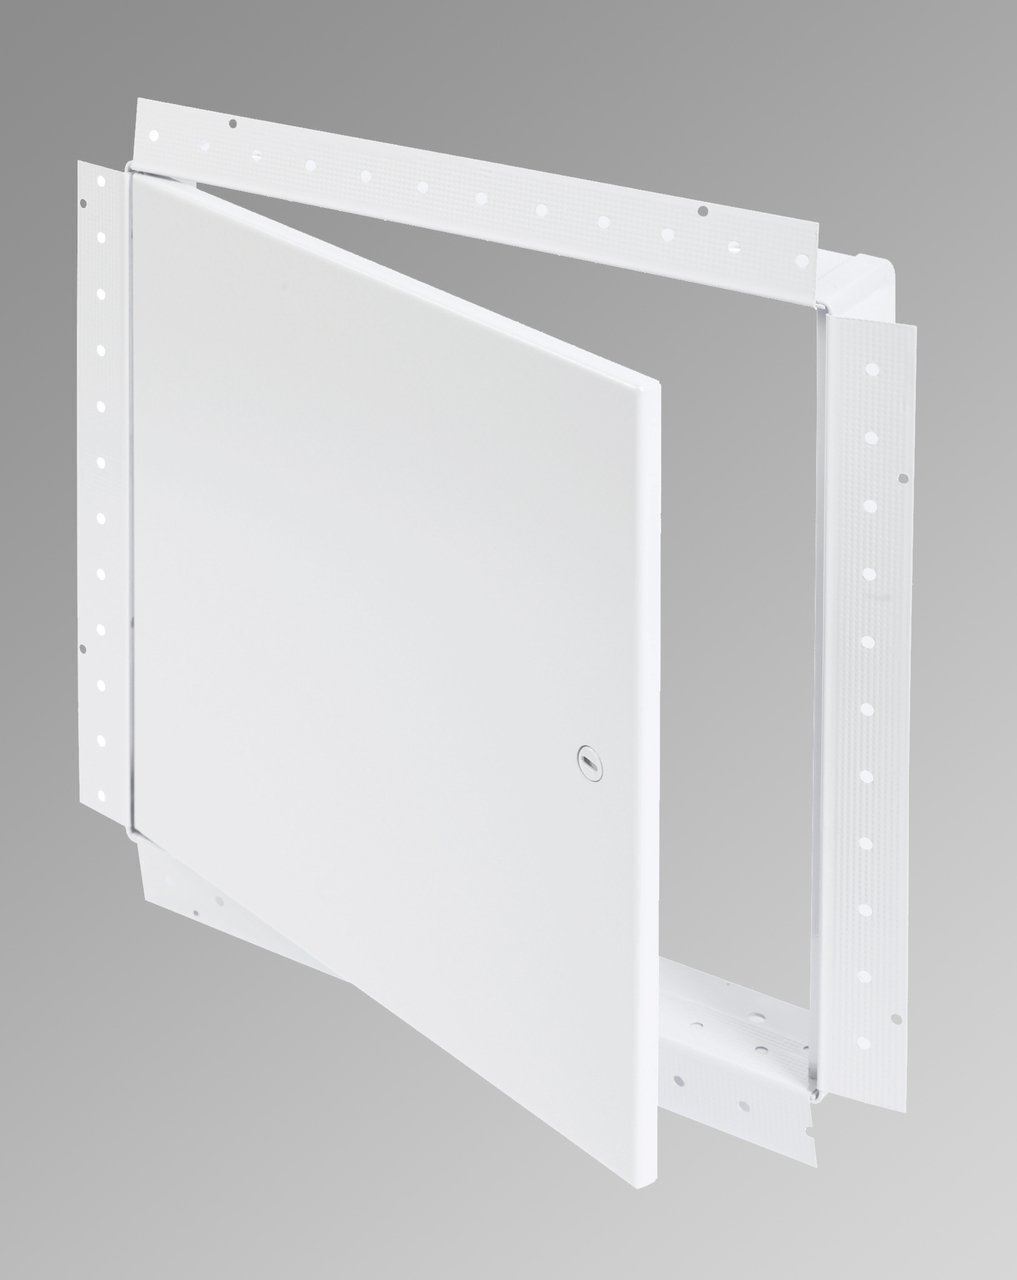 Cendrex Ahd-gyp General Prupose Access Door With Drywall Flange 12x12